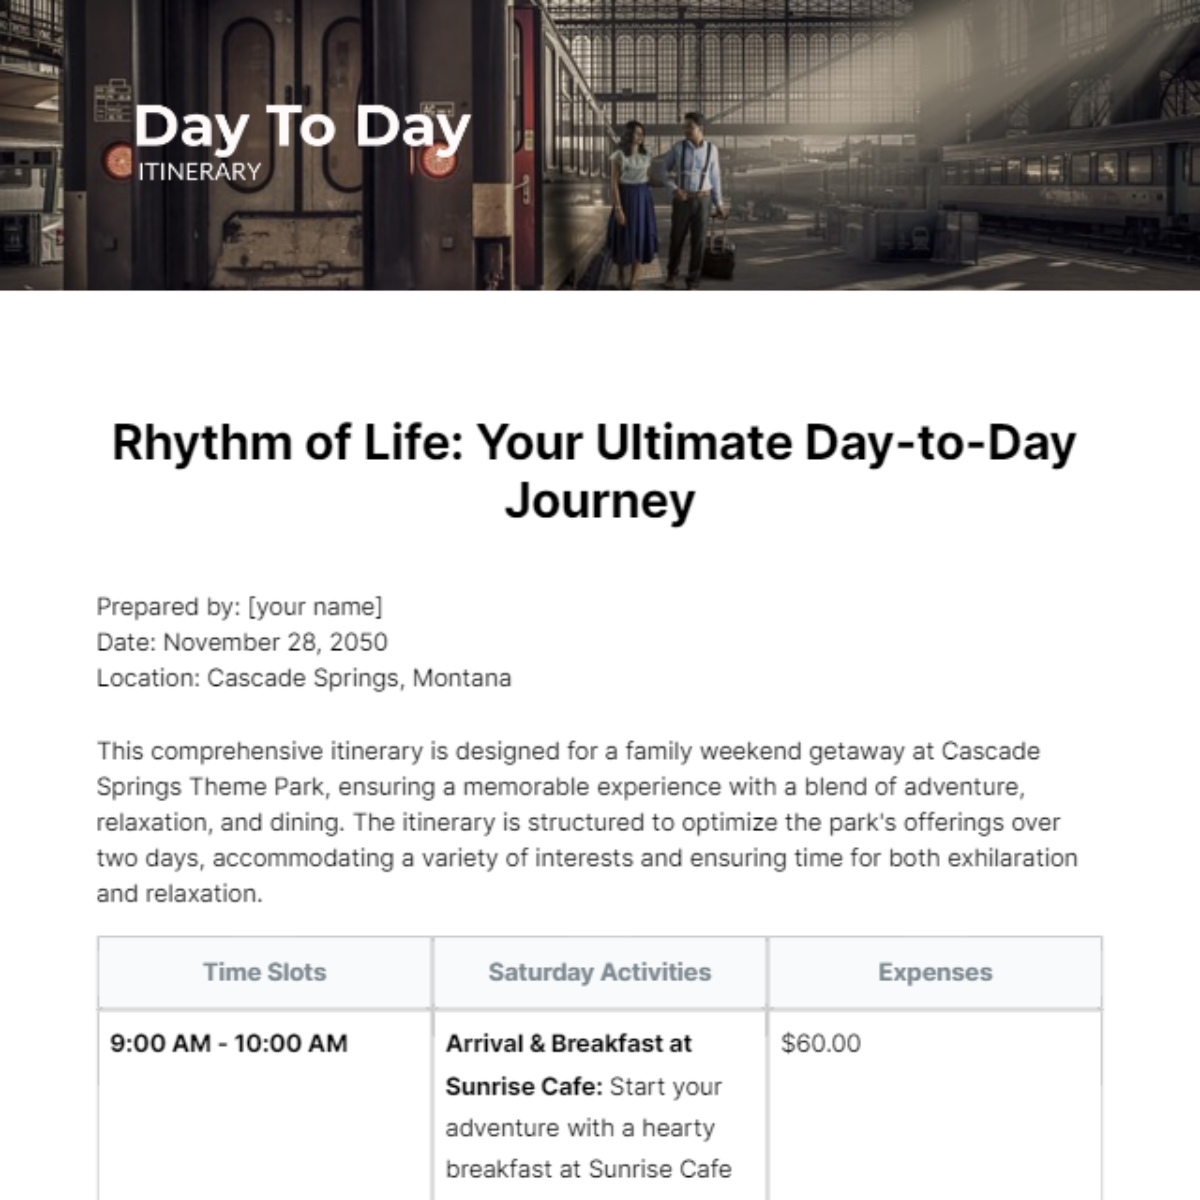 Day To Day Itinerary template